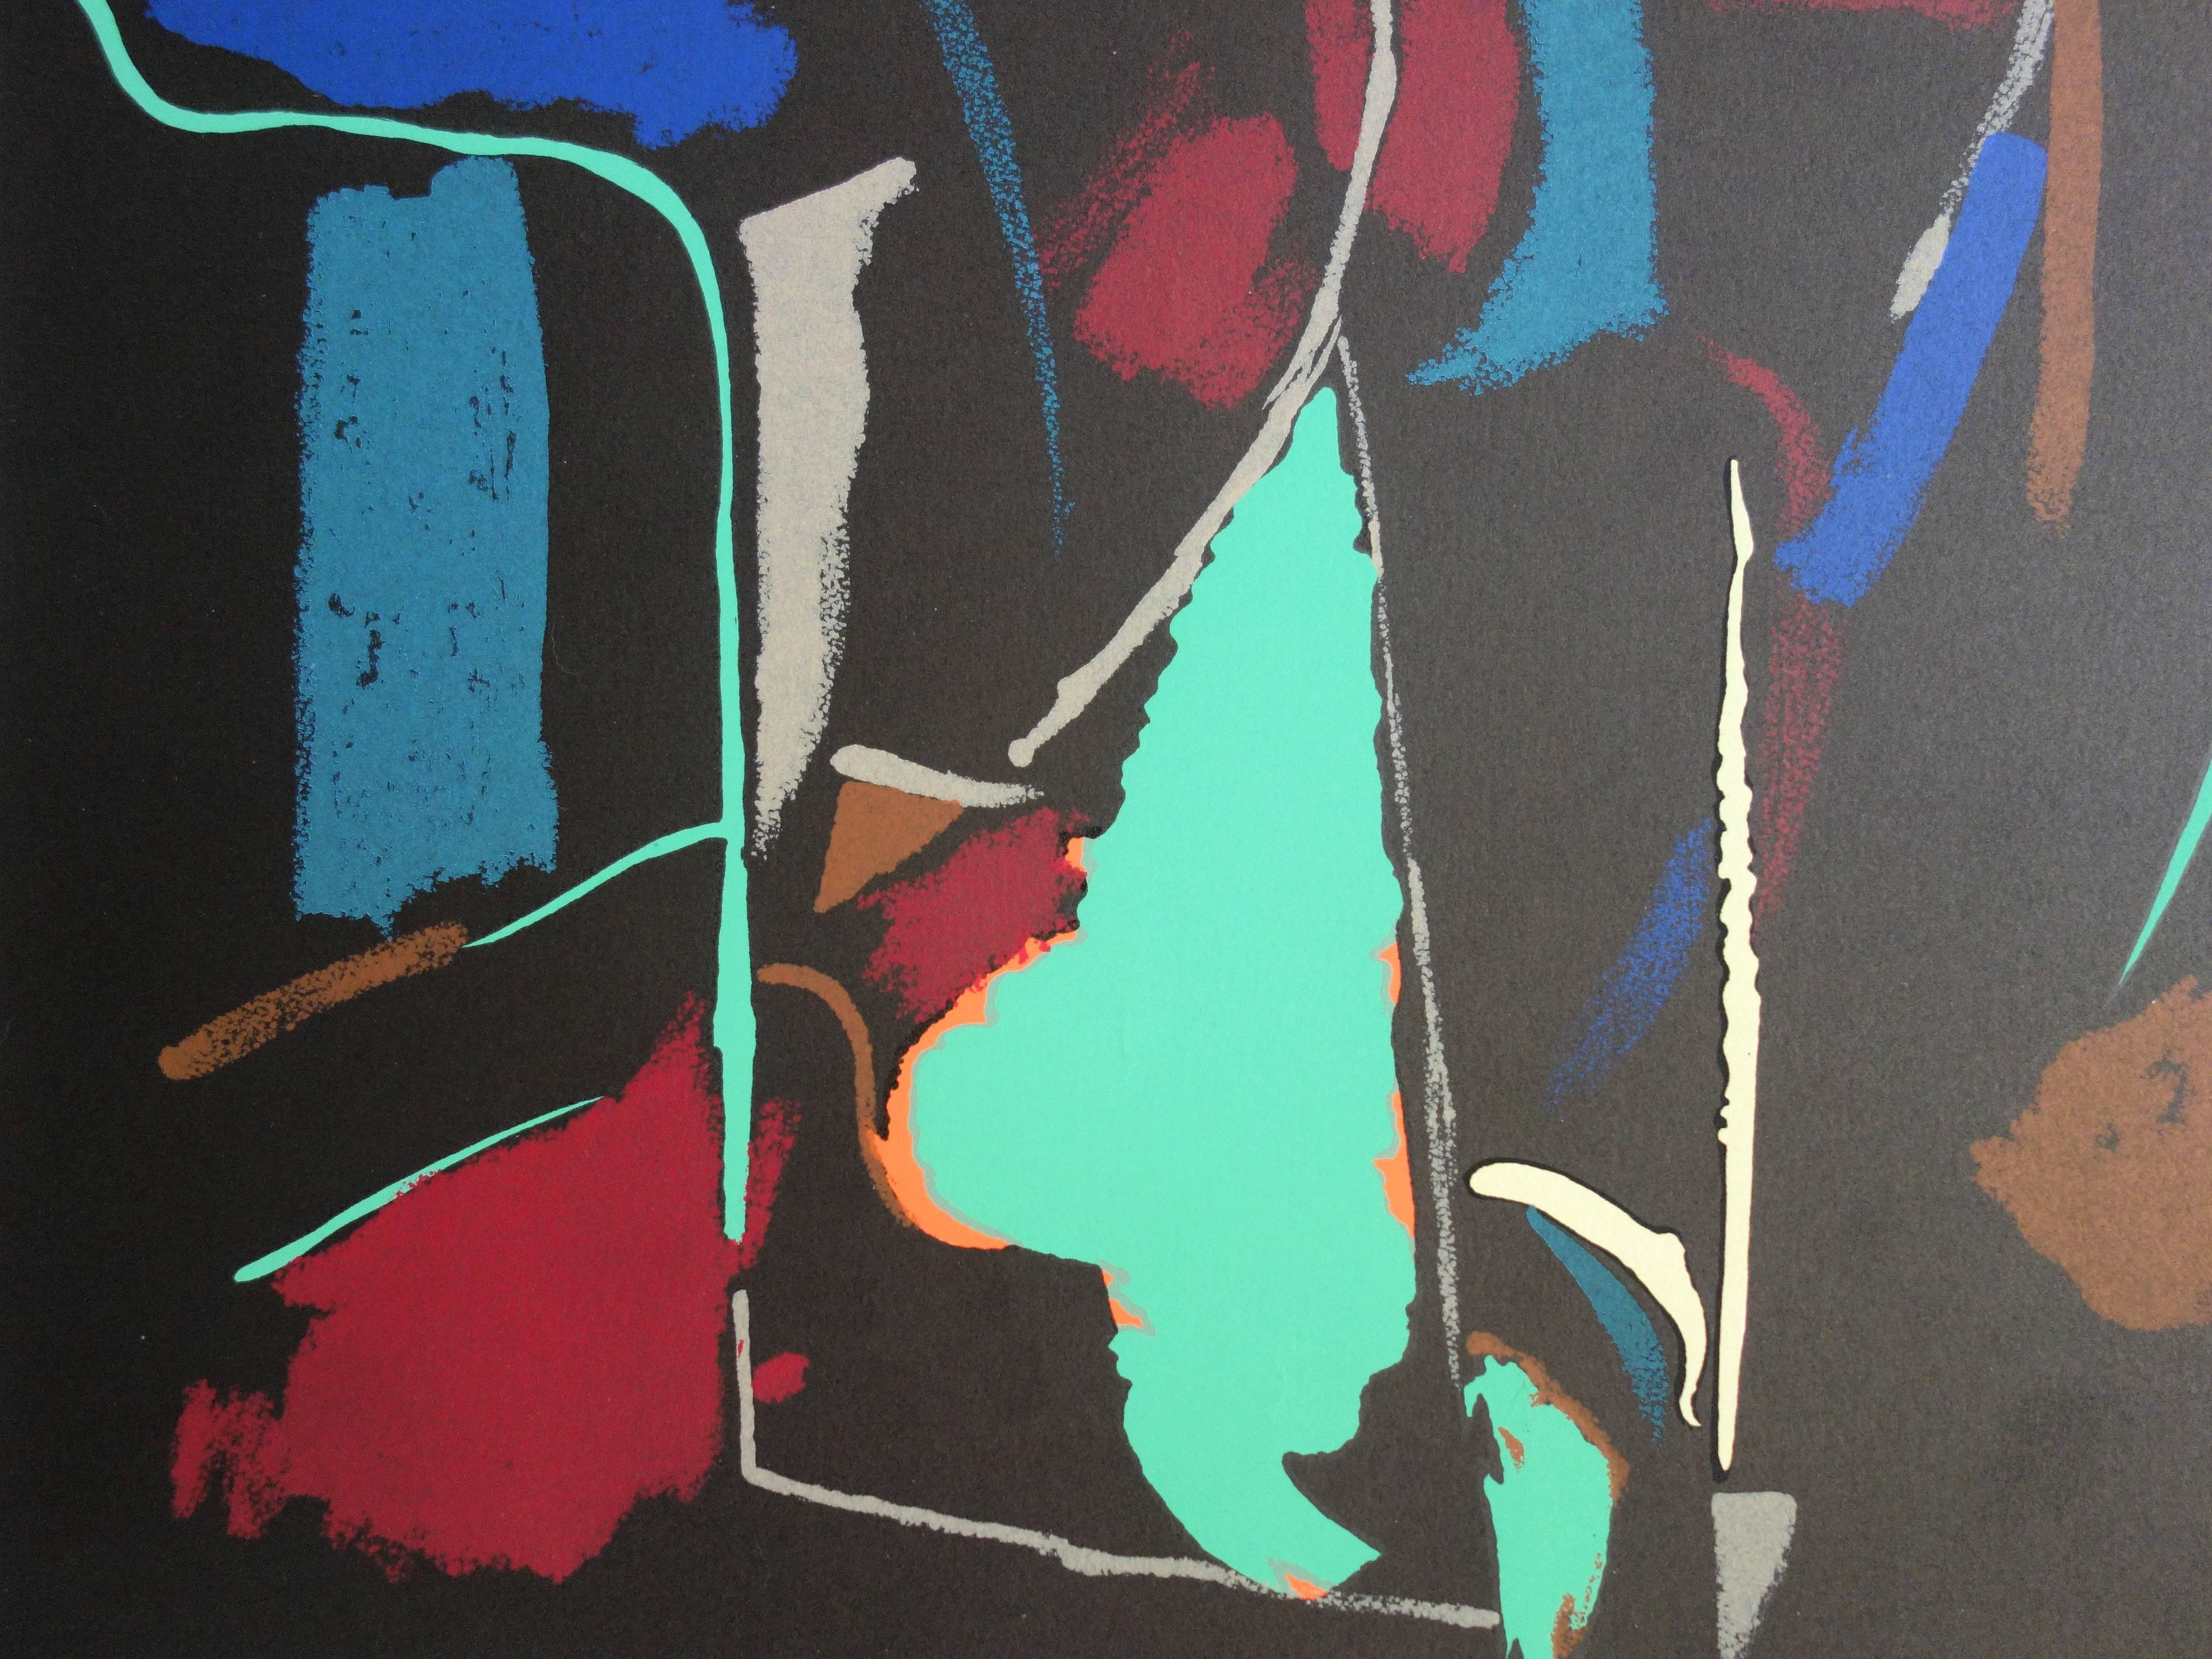 Abstract Composition on Black Background - Original handsigned lithograph For Sale 2